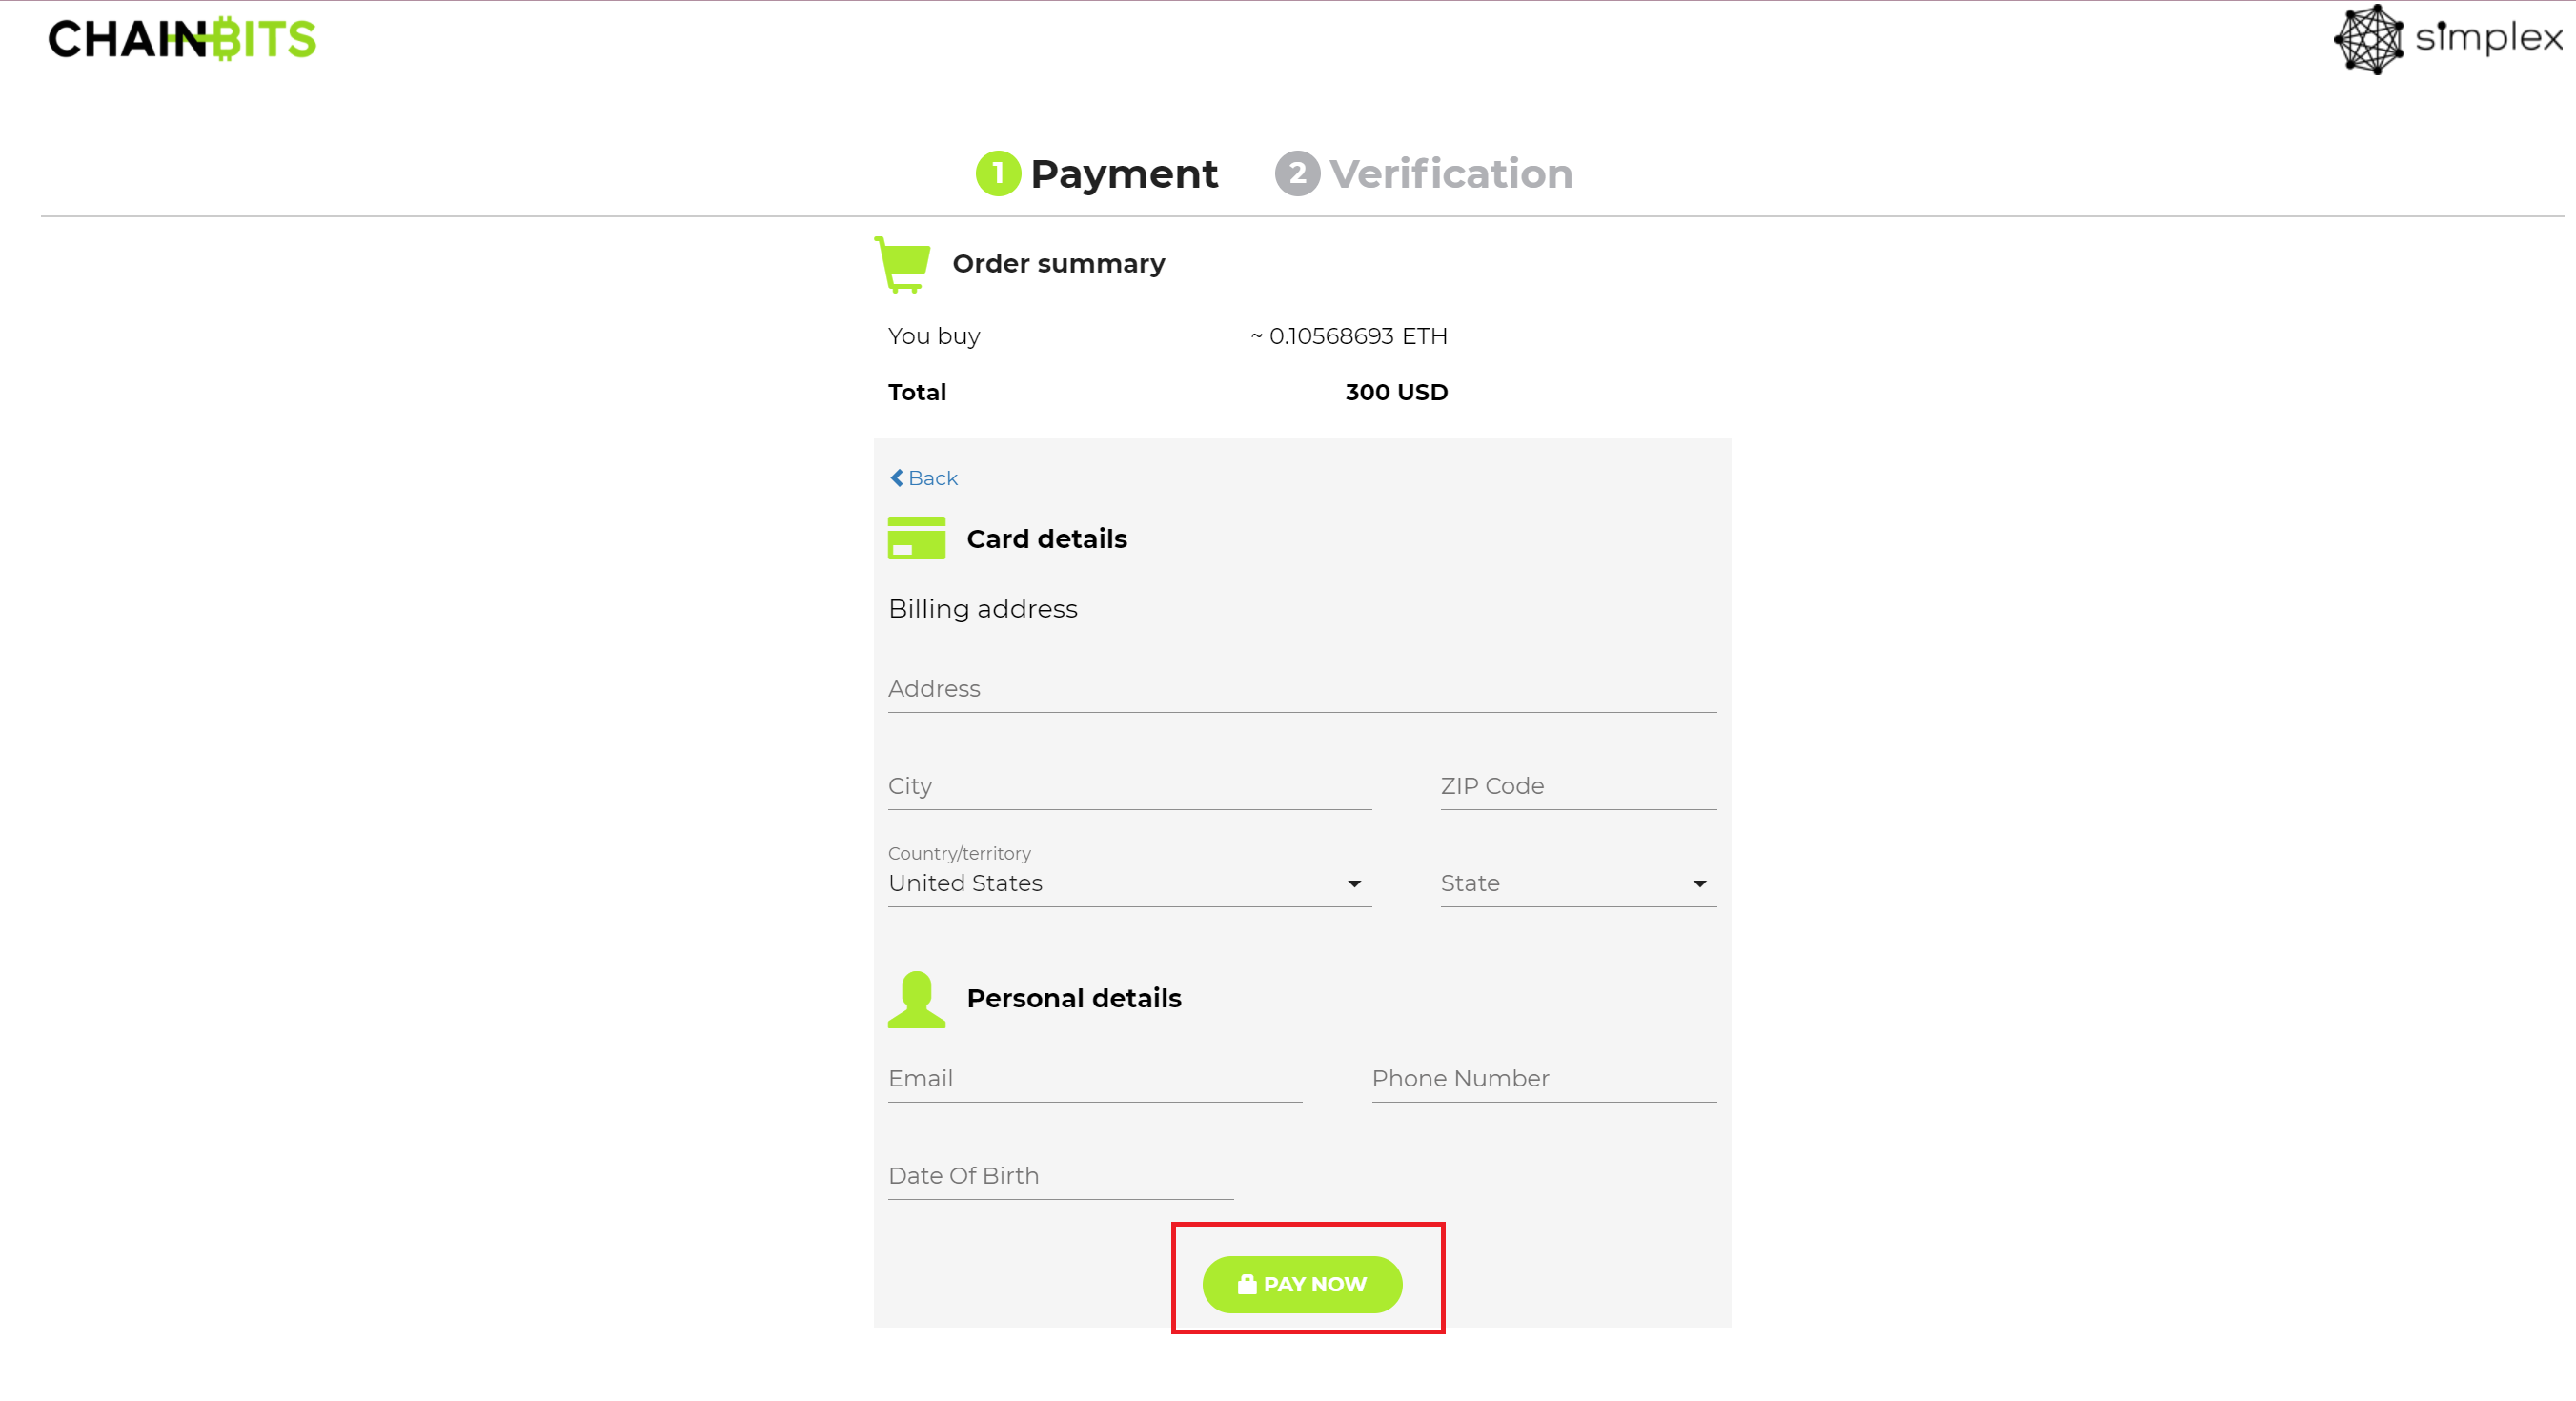 Enter your billing details and press Pay Now